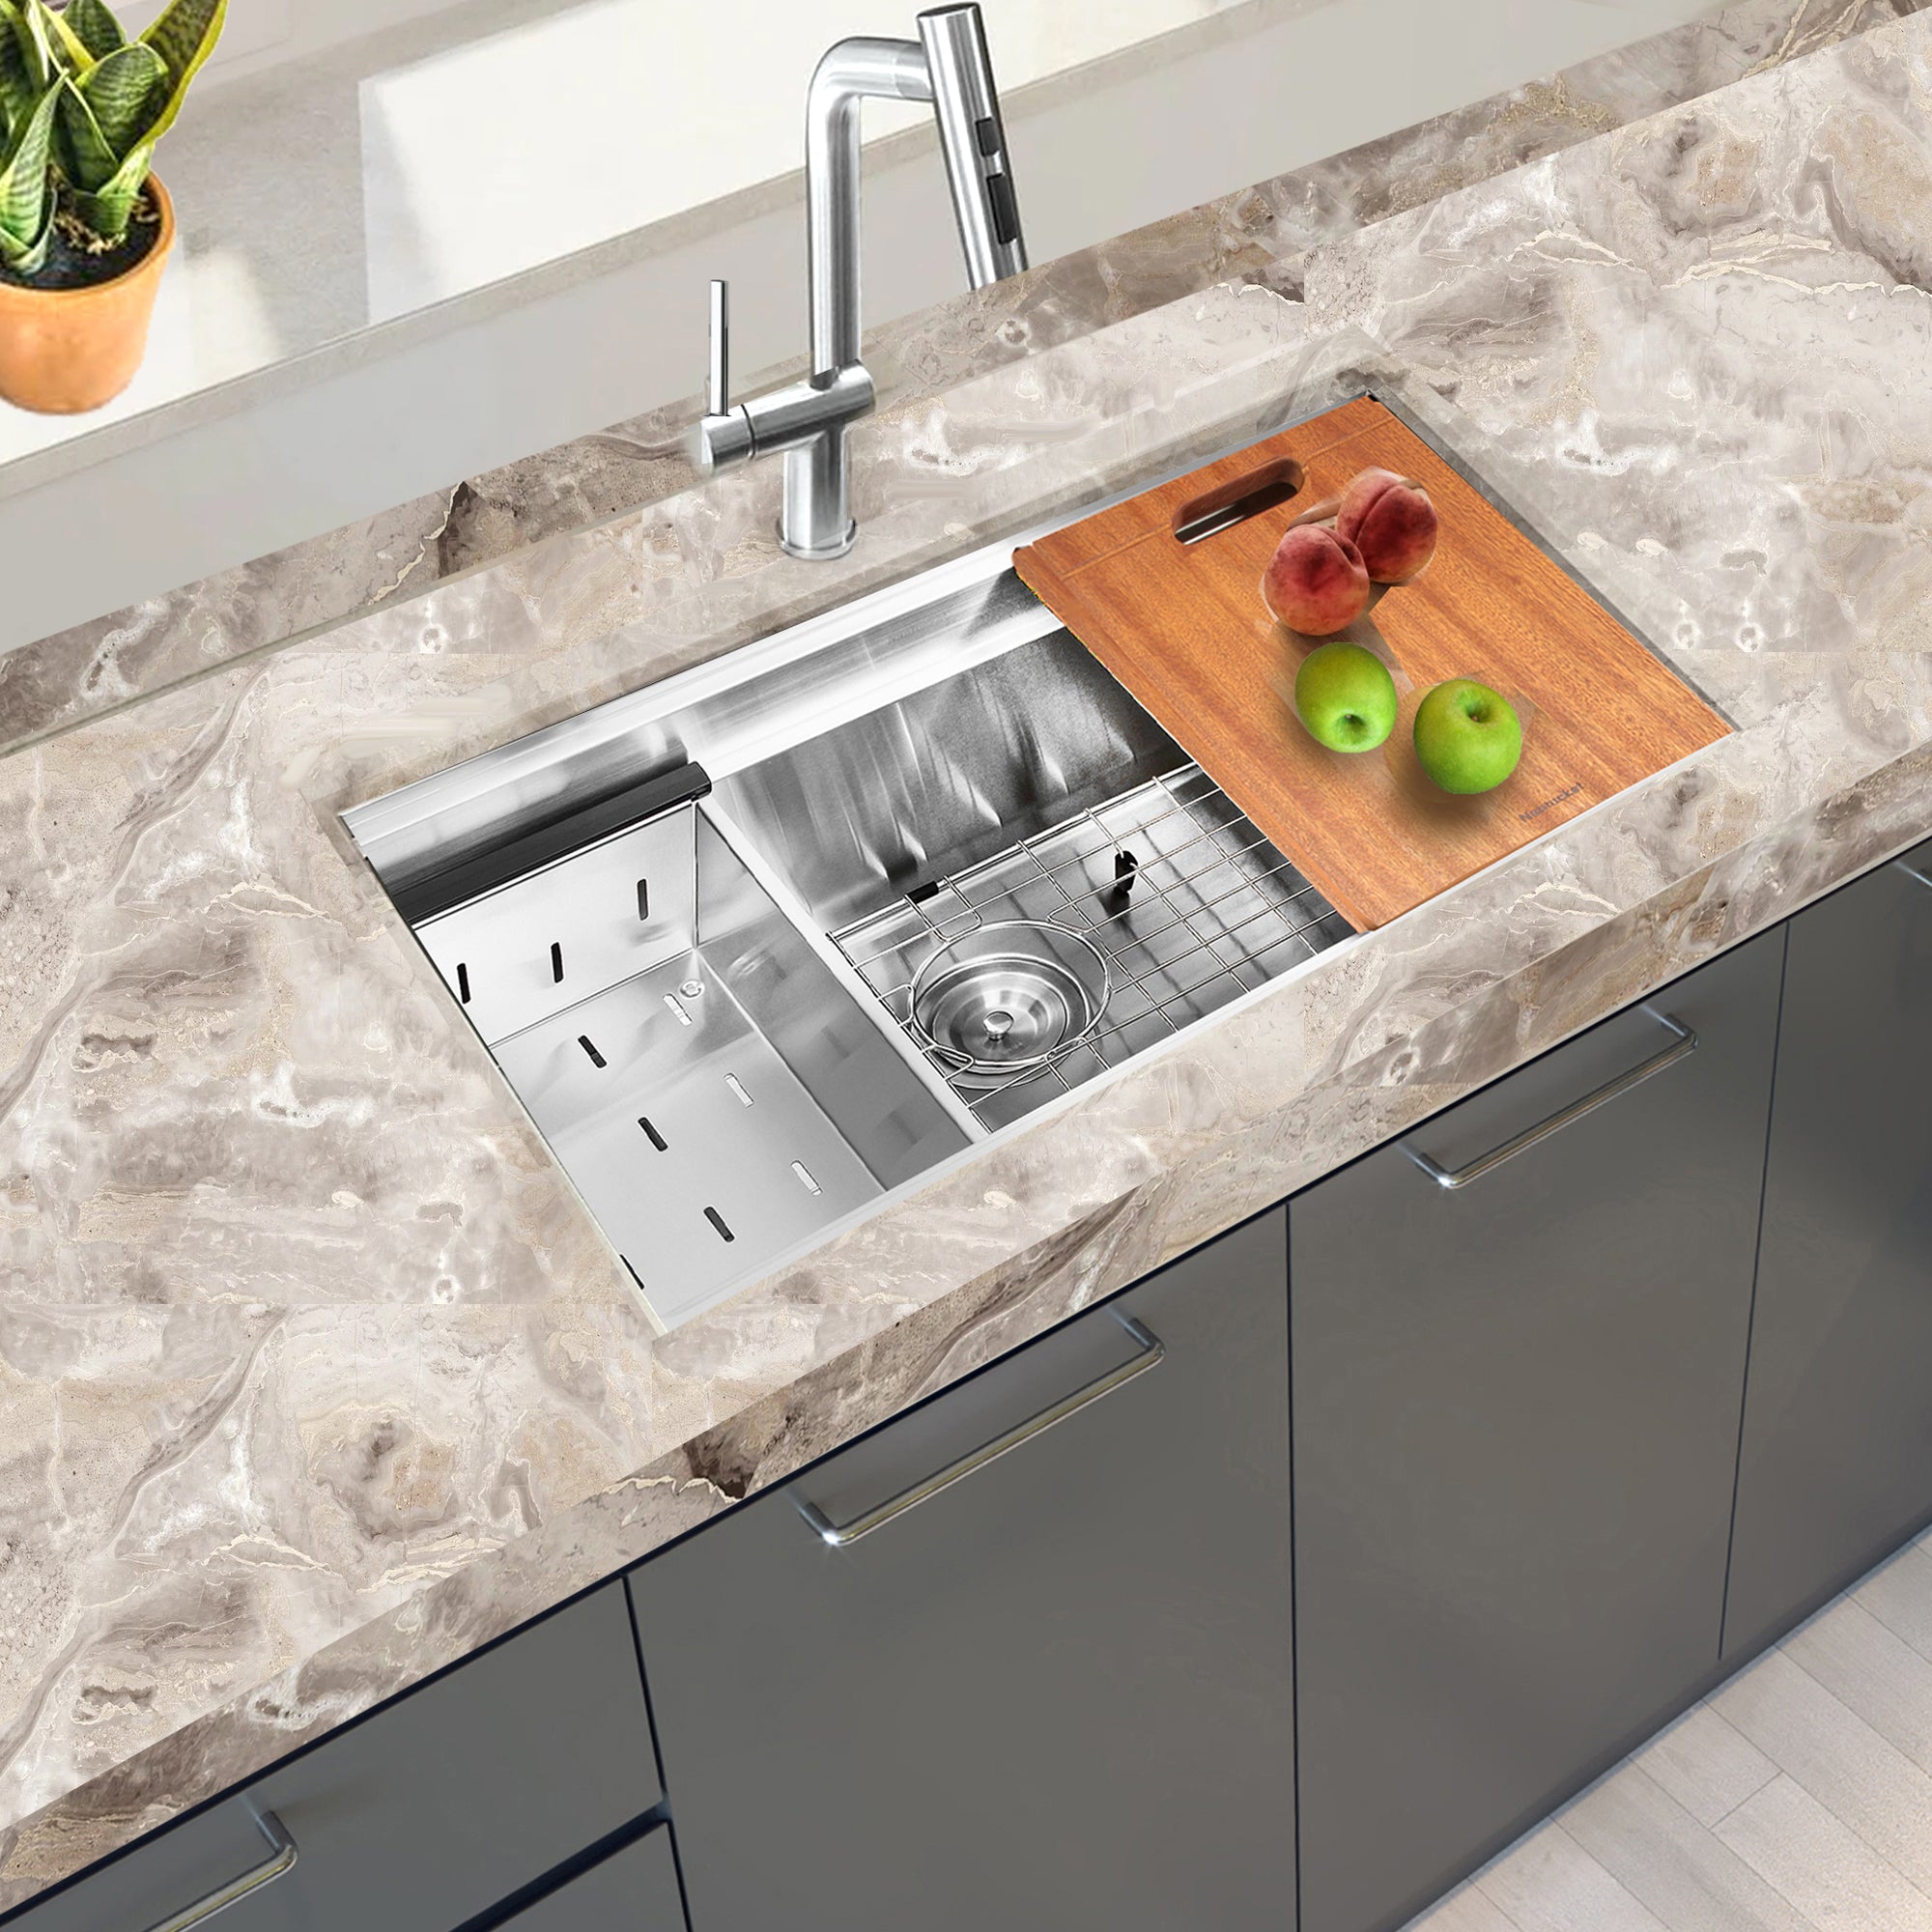 Nantucket Sinks SR-PS2-2818-16 - 28" Pro Series Workstation Single Bowl Undermount Stainless Steel Kitchen Sink with Included Accessories